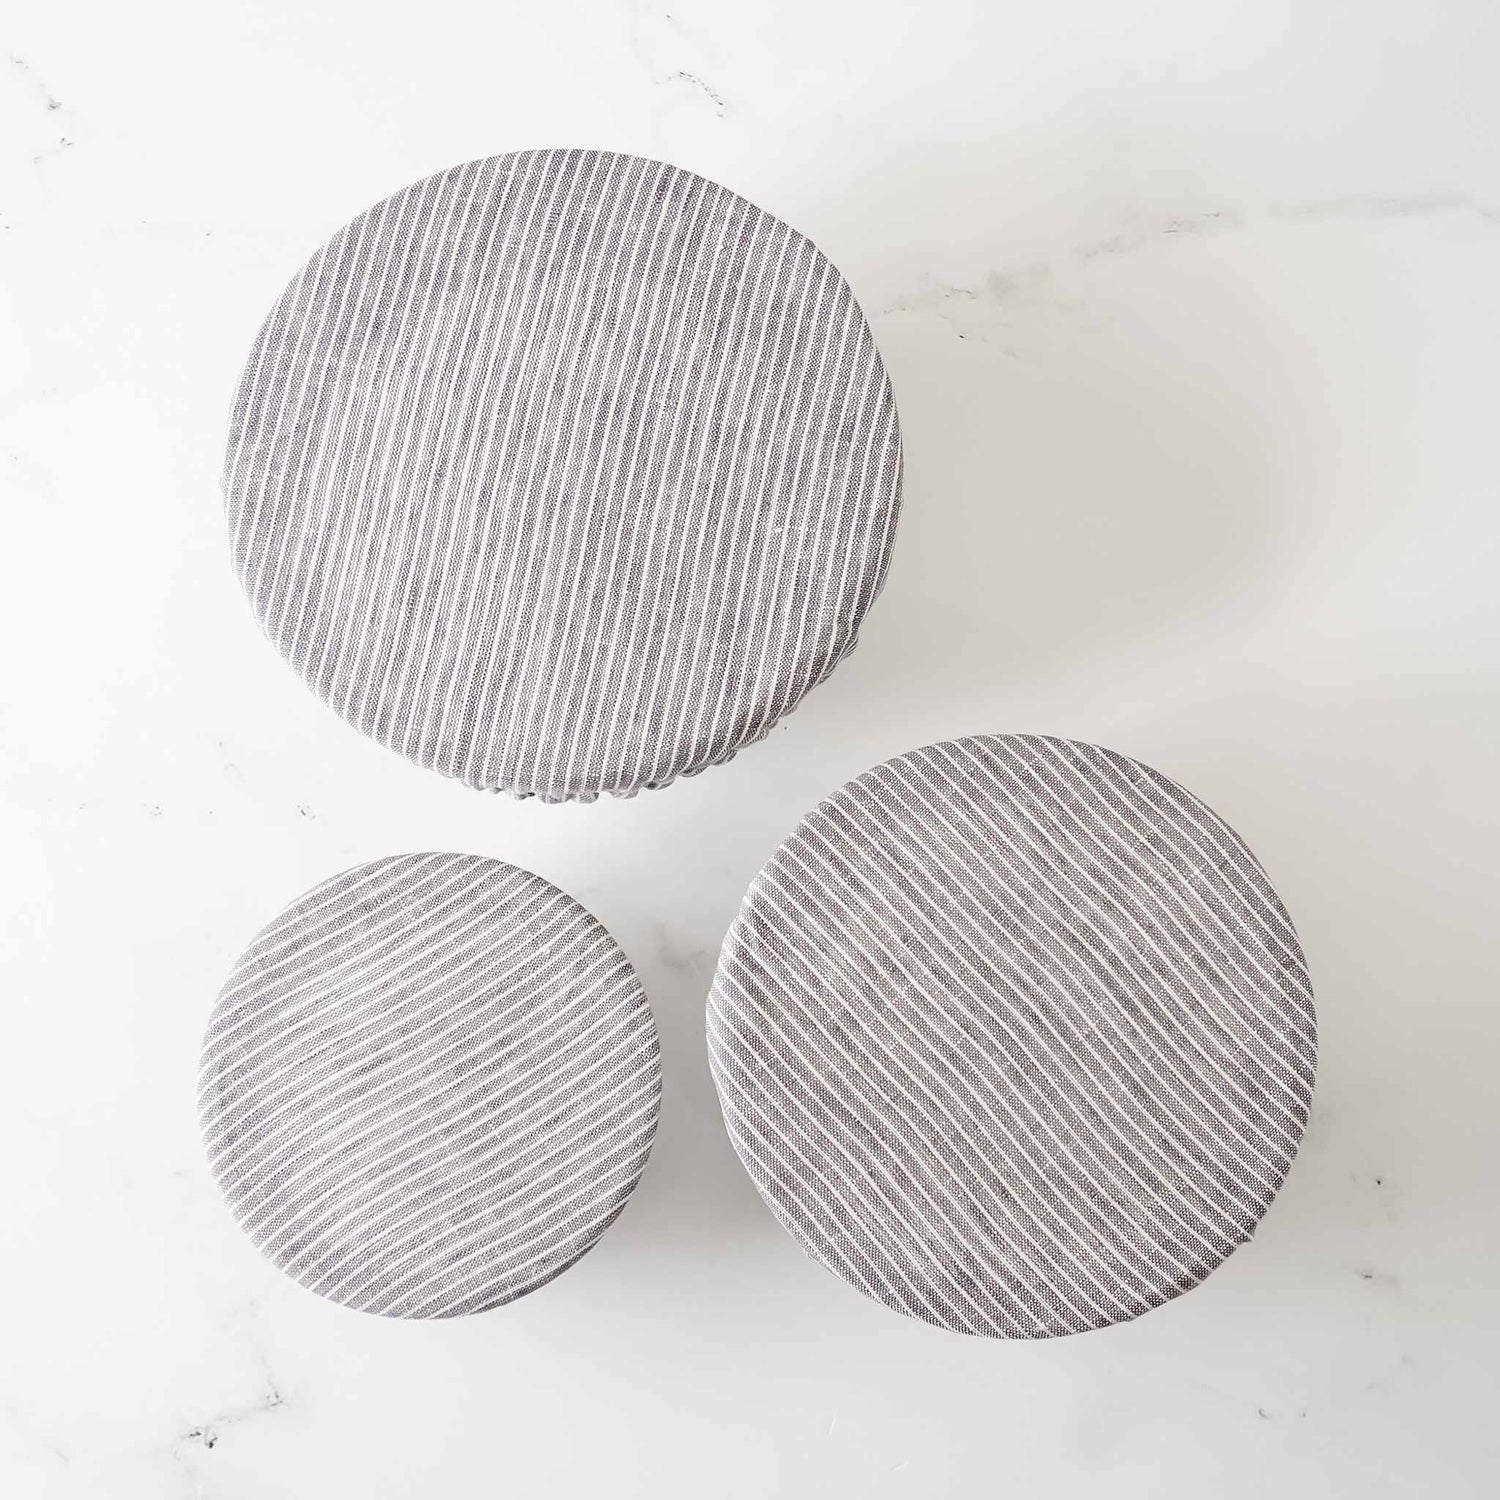 linen dish covers in gray and white stripe